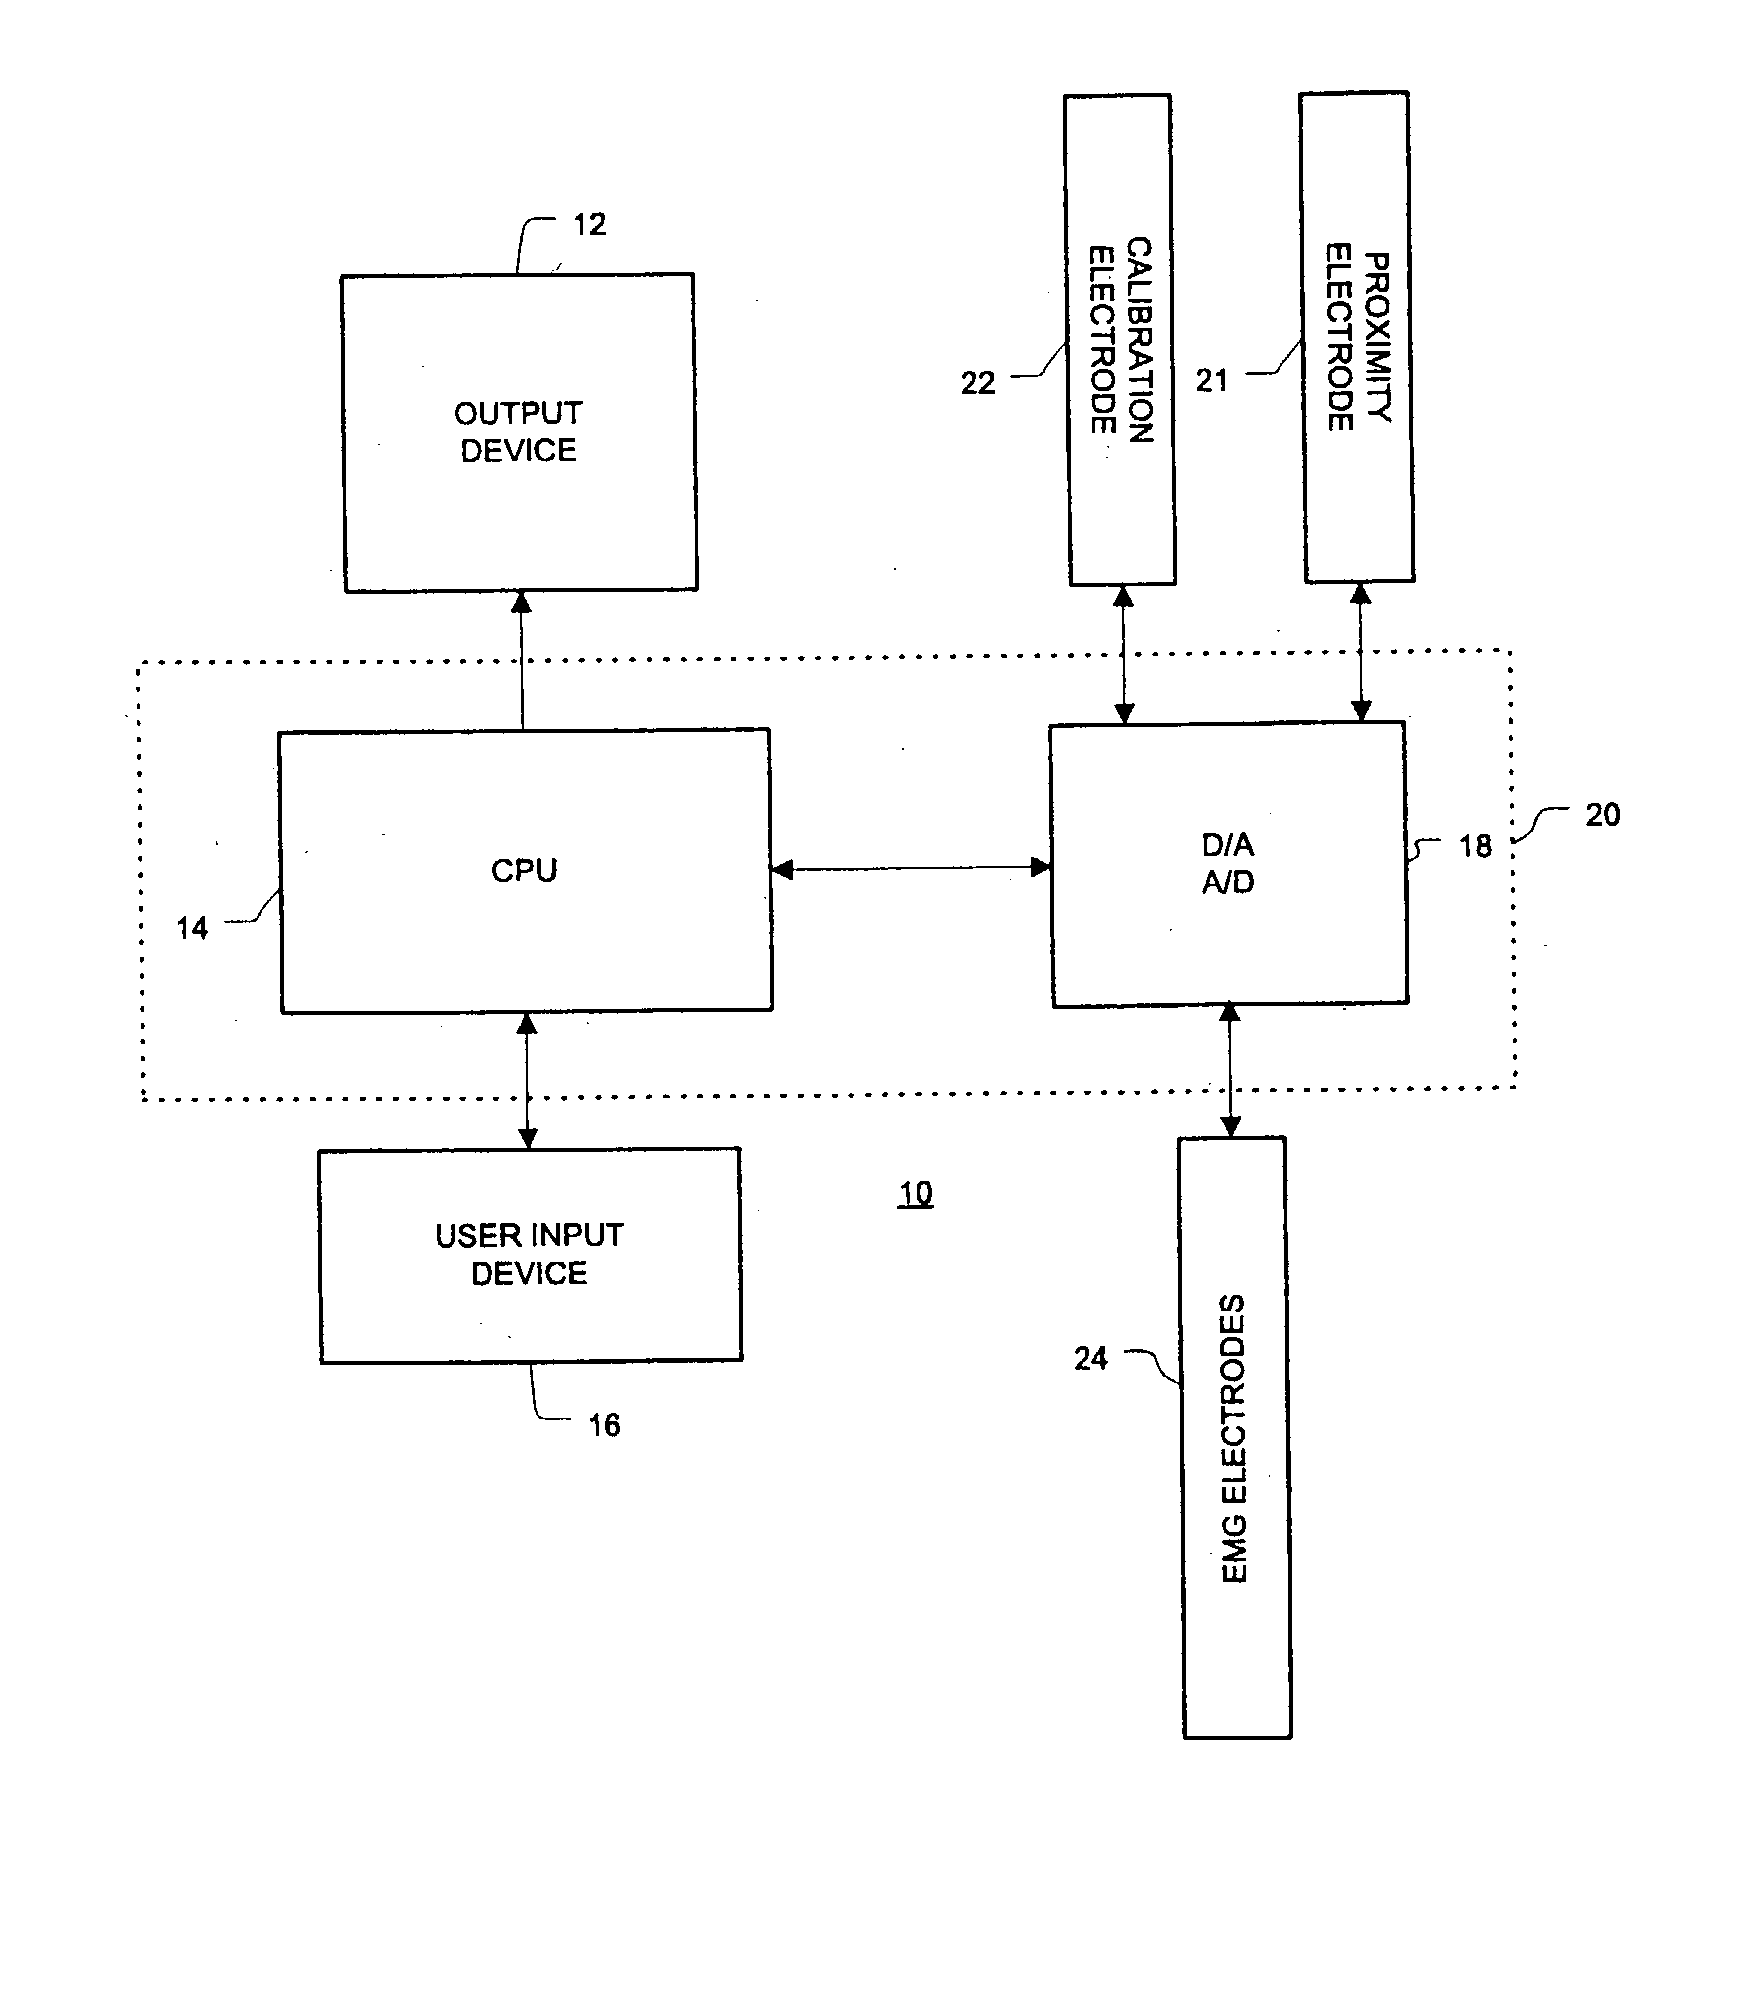 Relative nerve movement and status detection system and method